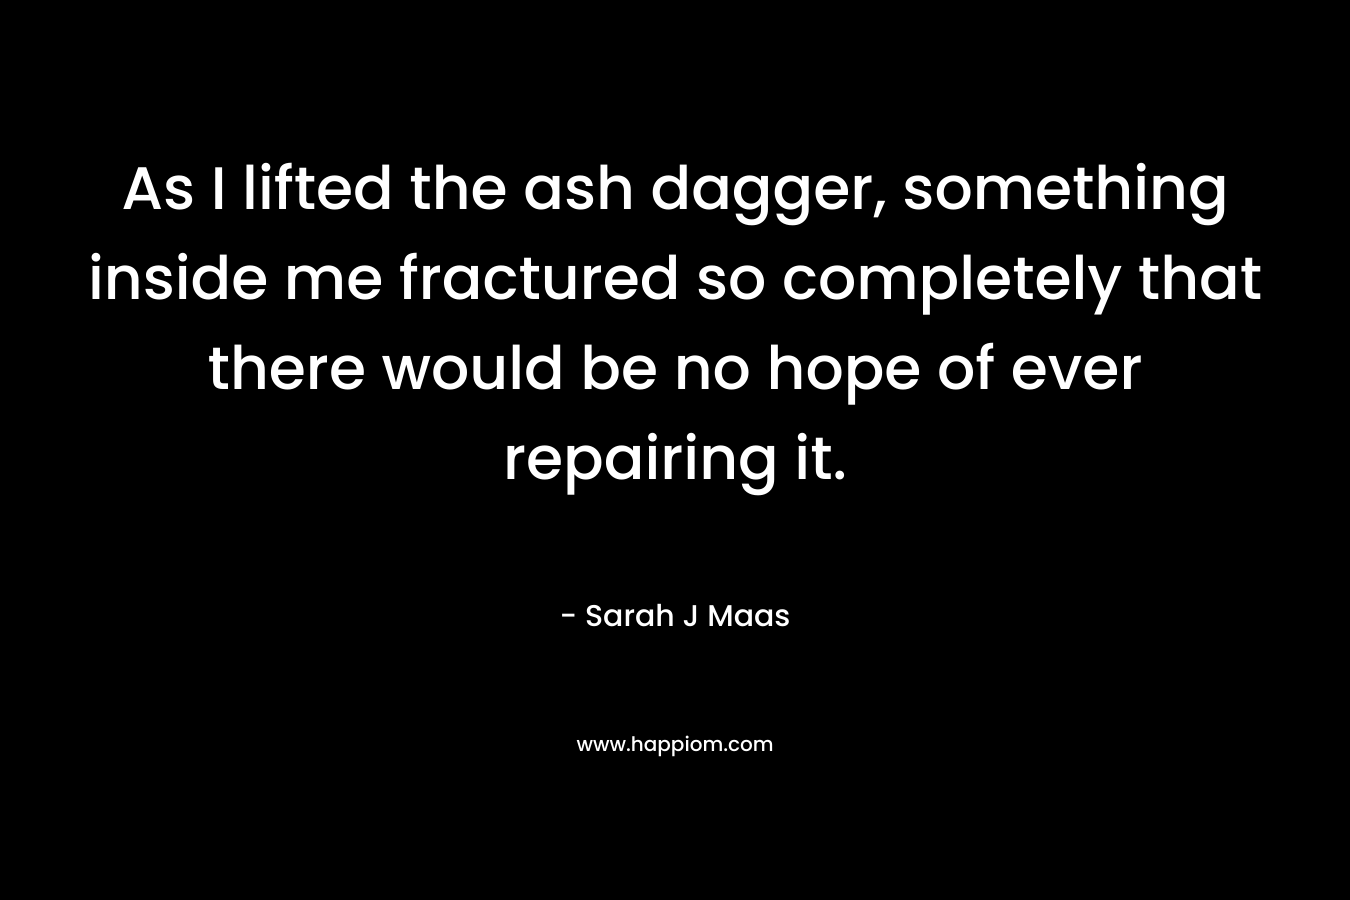 As I lifted the ash dagger, something inside me fractured so completely that there would be no hope of ever repairing it.